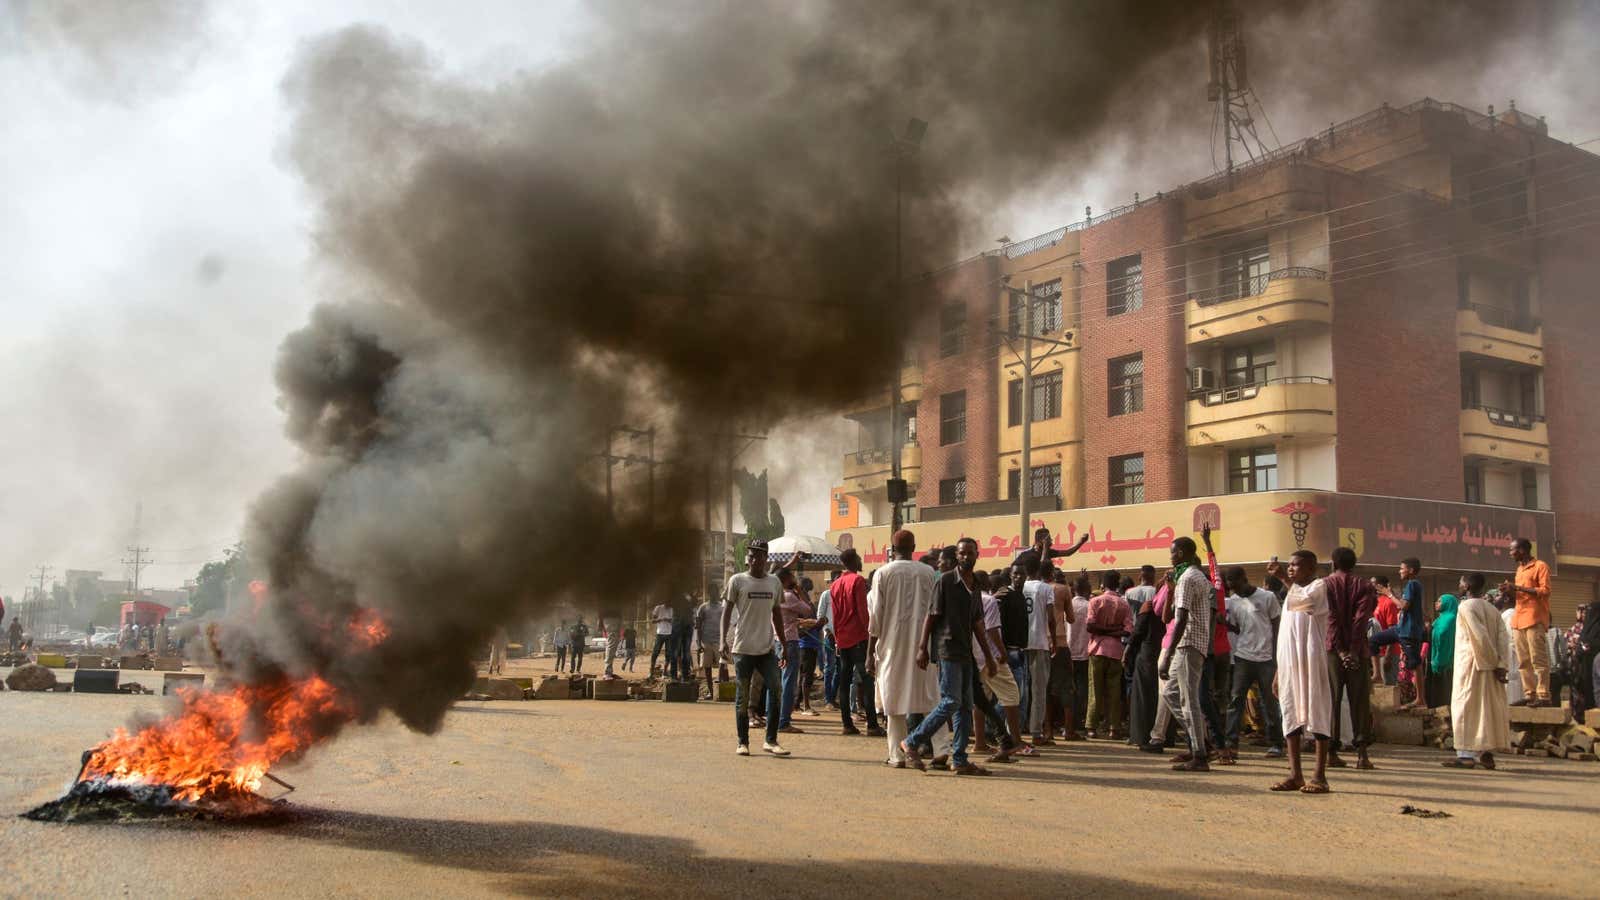 Sudan demonstrations continue in the face of the worst violence after al-Bashir’s ouster.